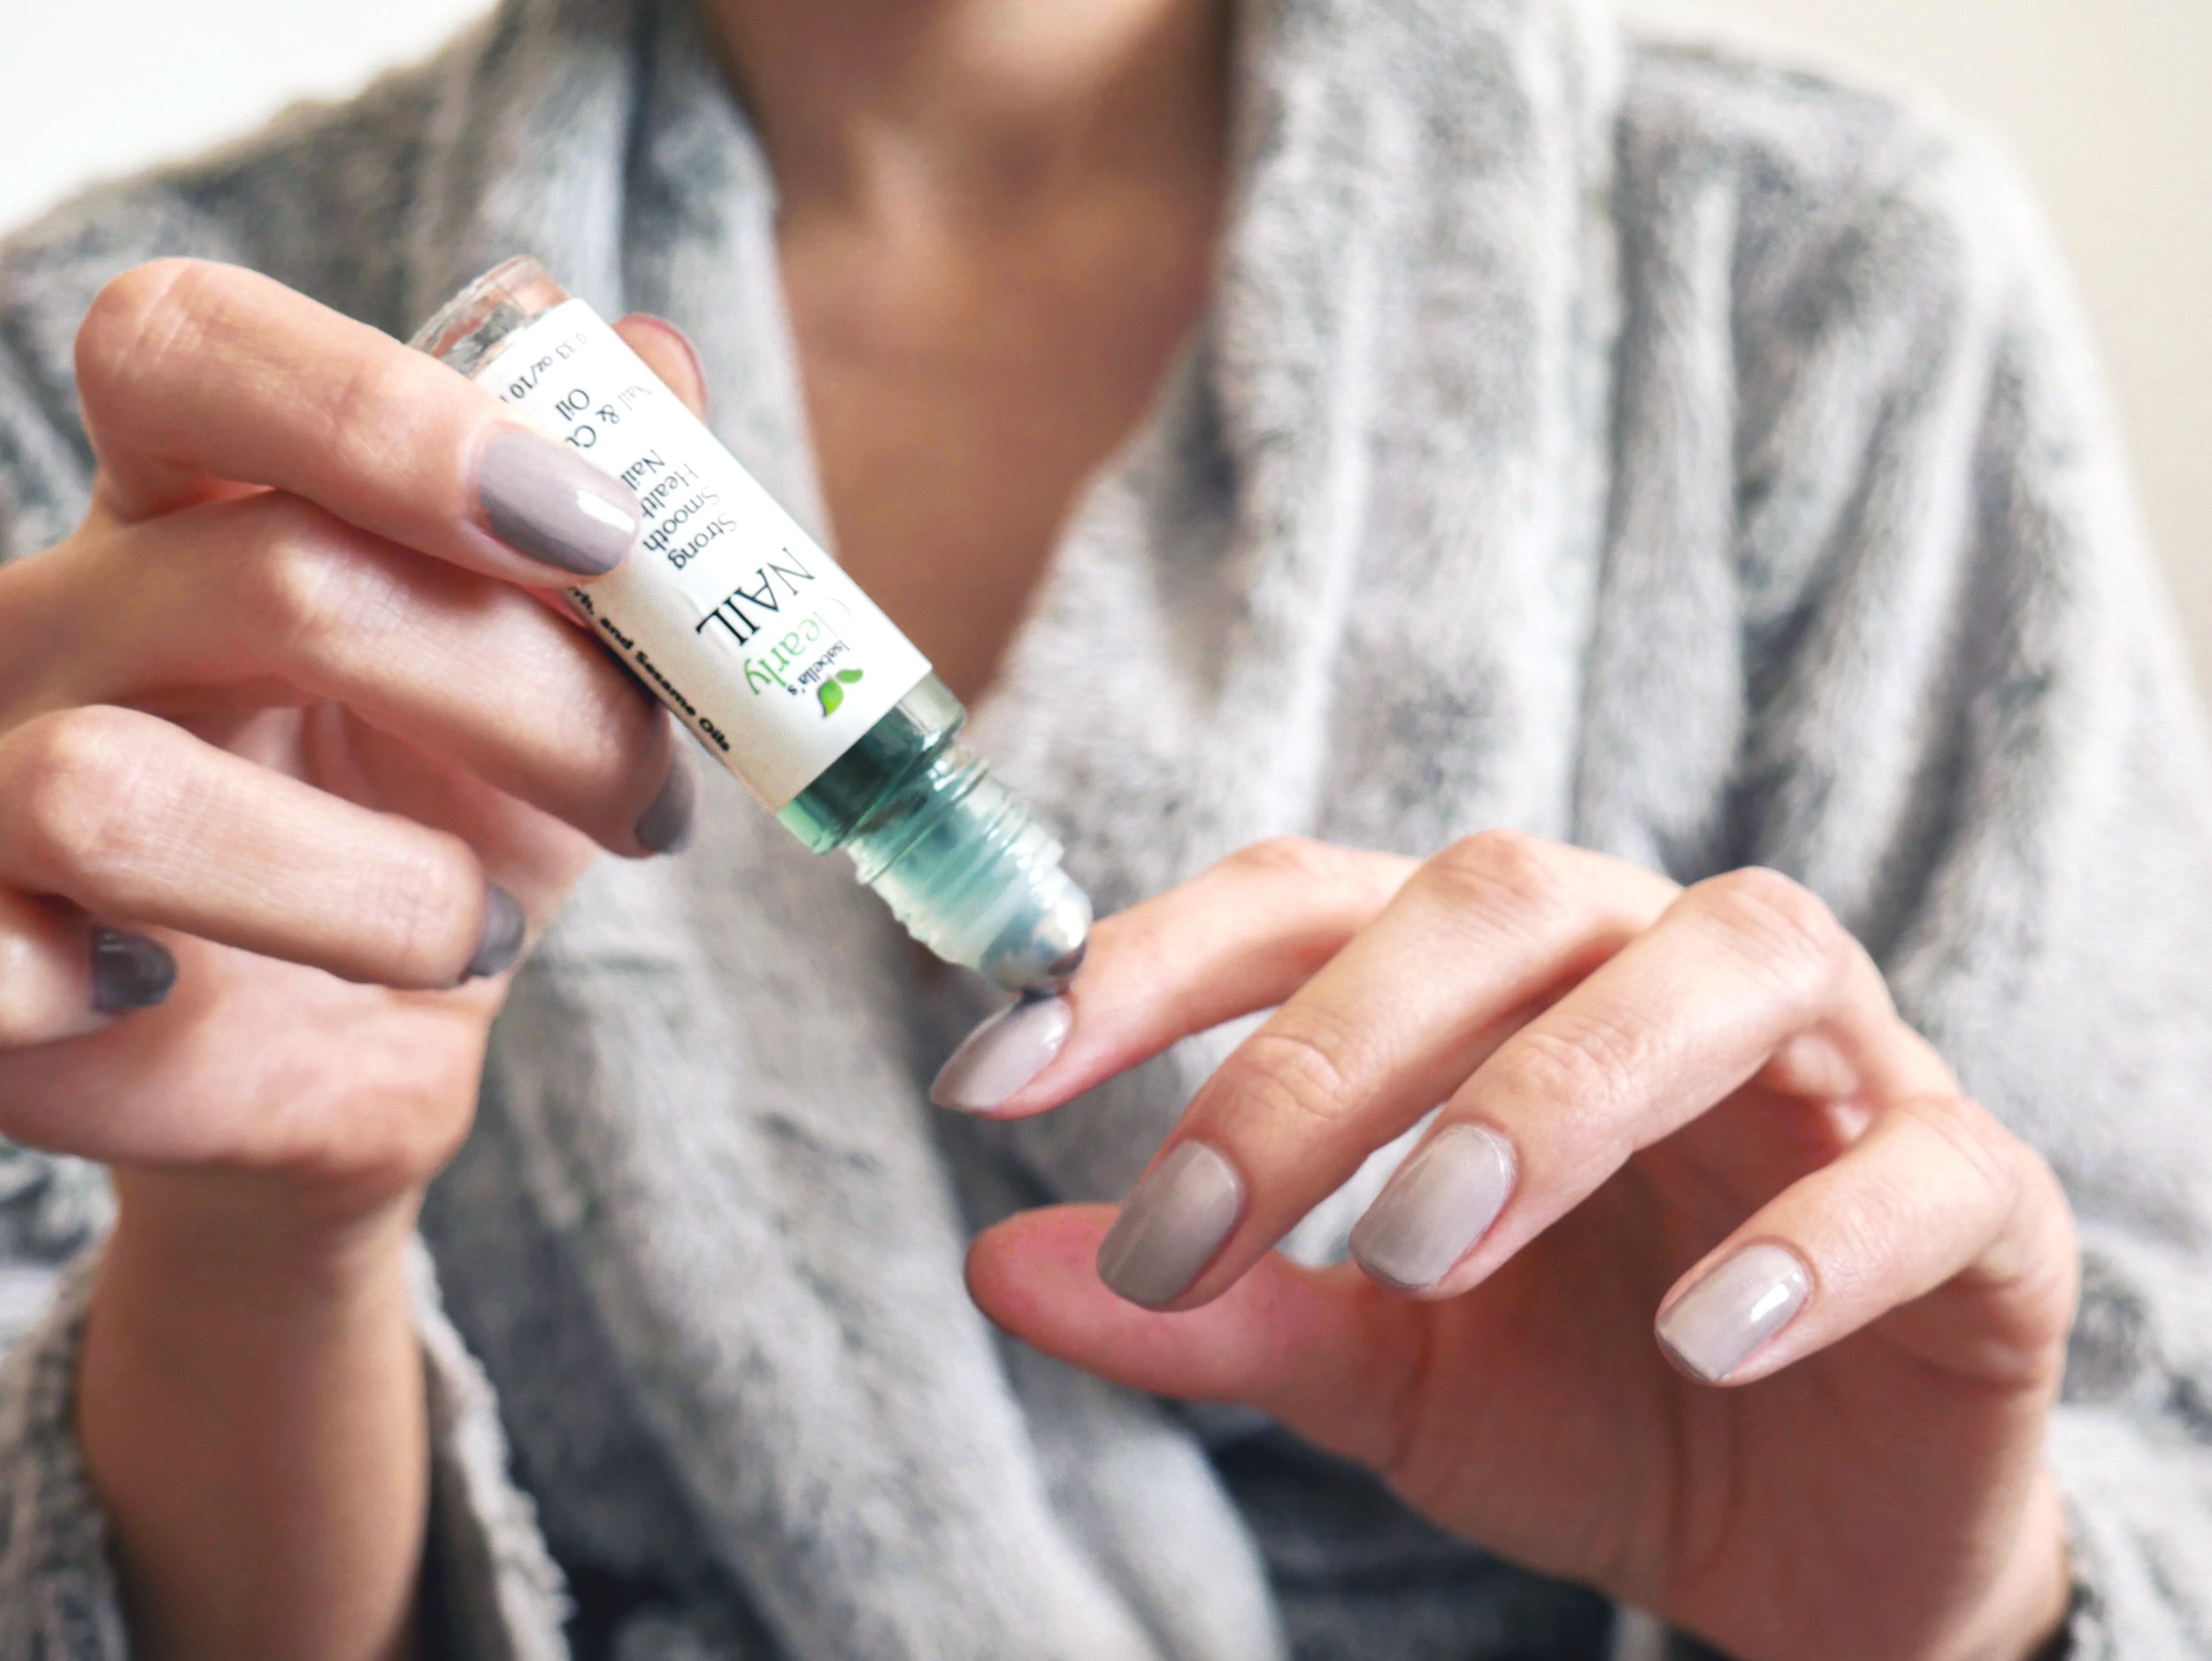 The routine to follow for healthy nails